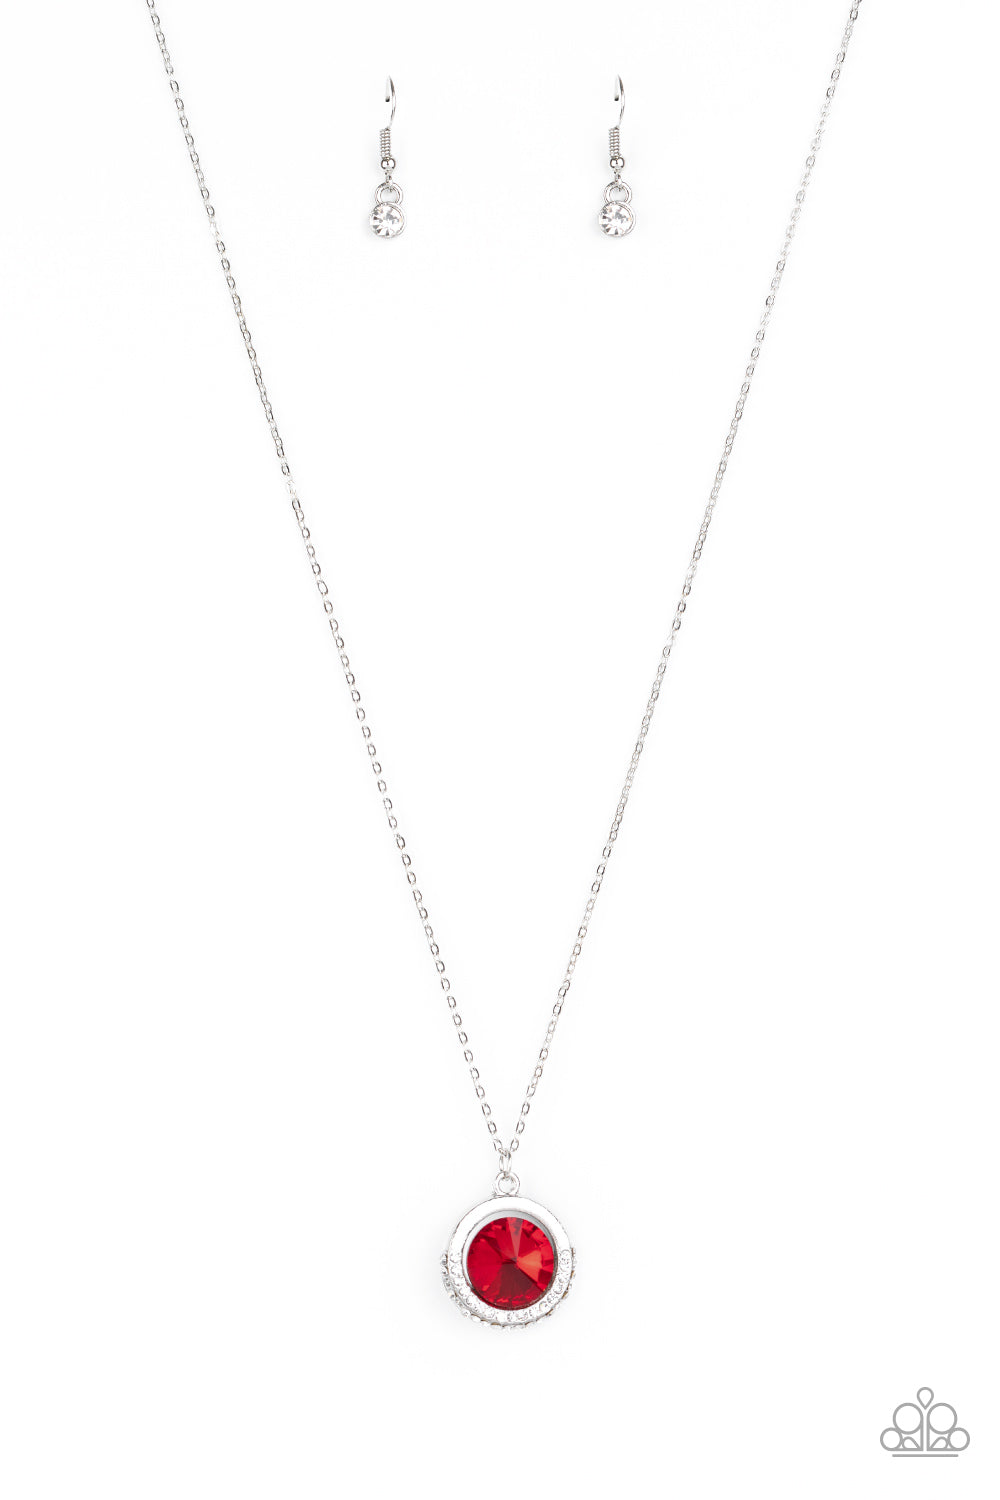 Paparazzi Necklace - Trademark Twinkle - Red